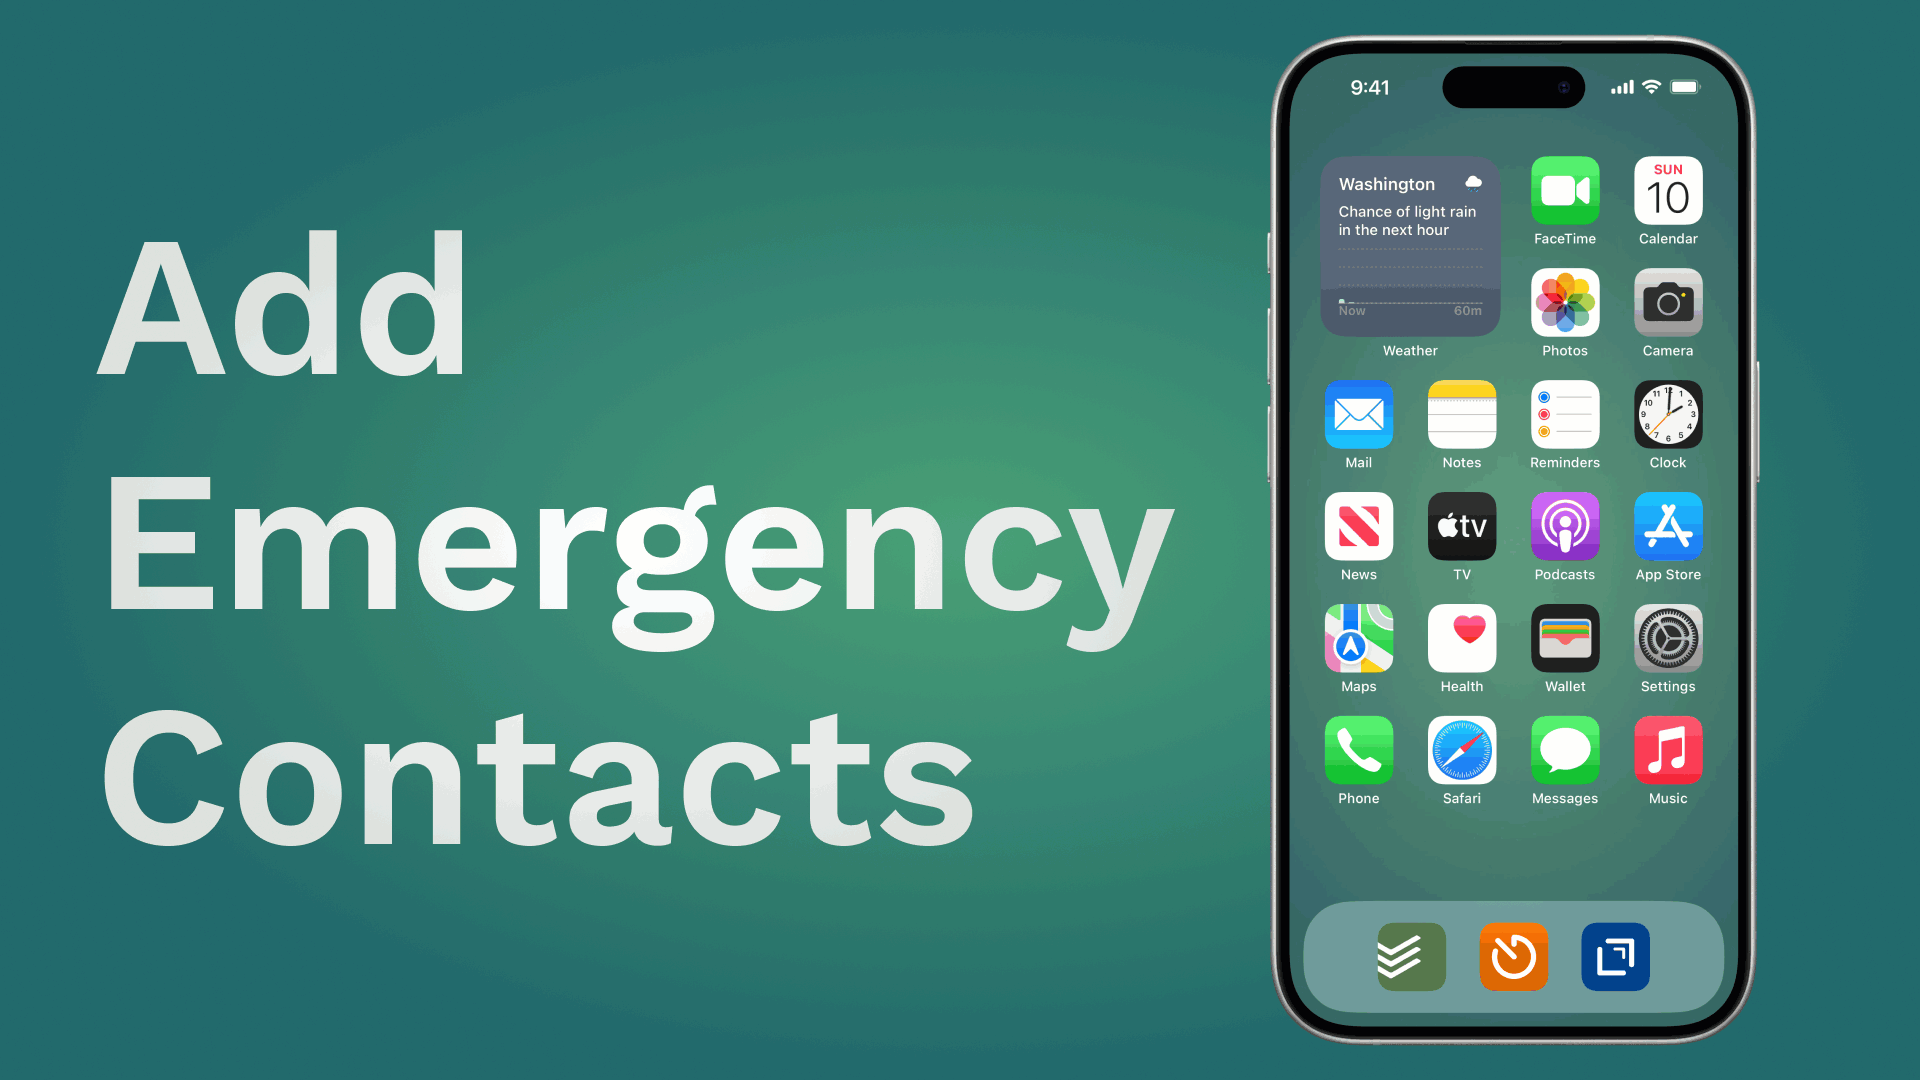 Emergency contacts added to iPhone for quick access in case of emergencies. Stay prepared and safe with this feature.